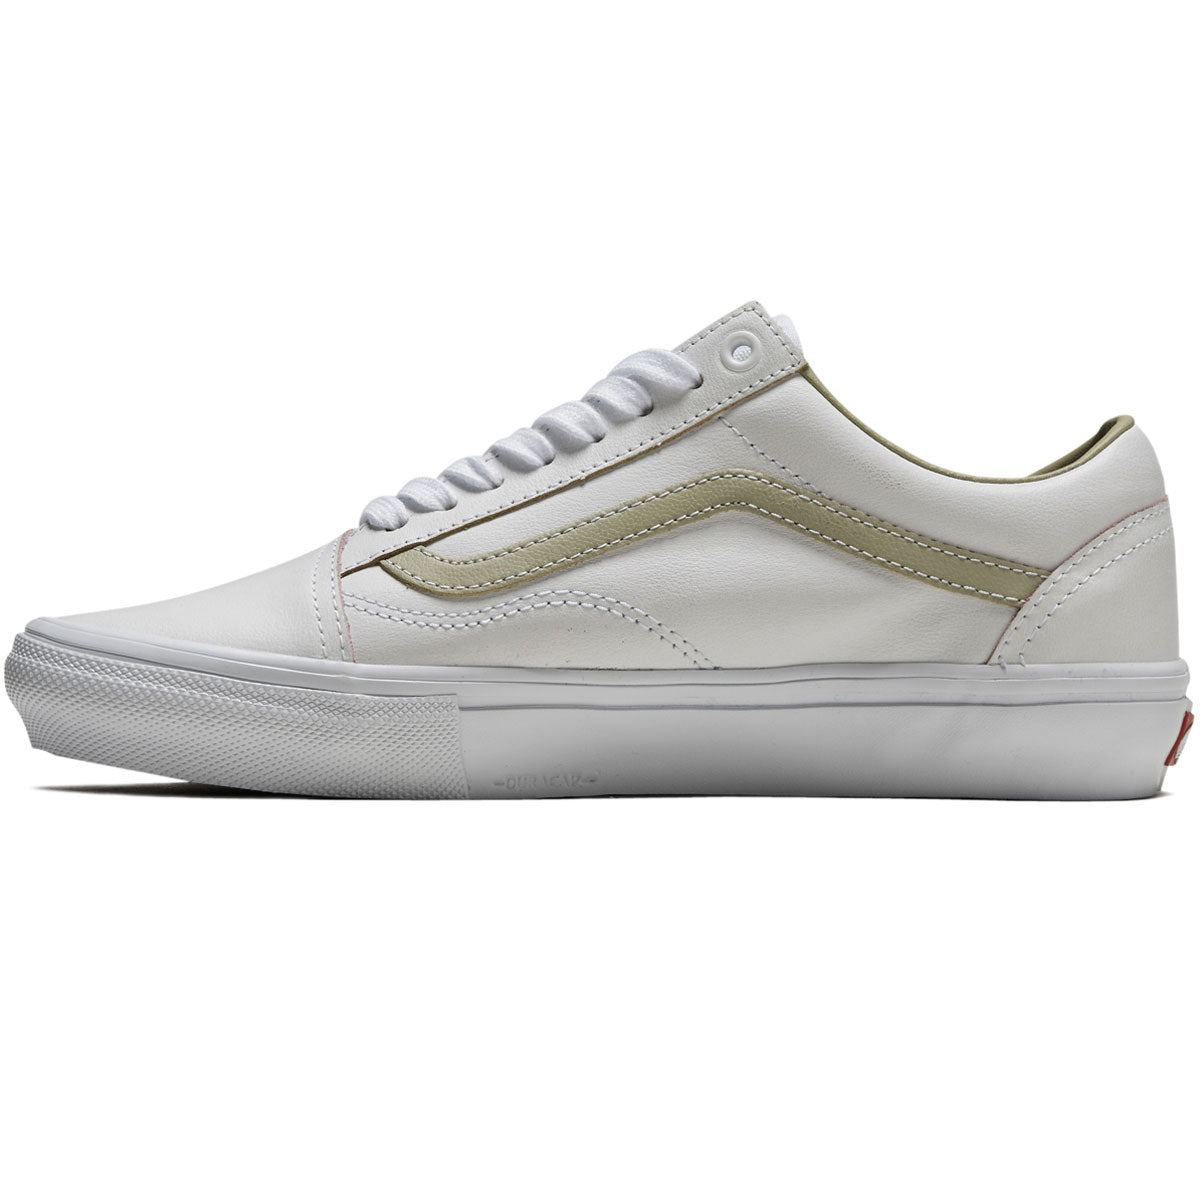 Vans Skate Old Skool Shoes - Serio Collection Mint/White – CCS